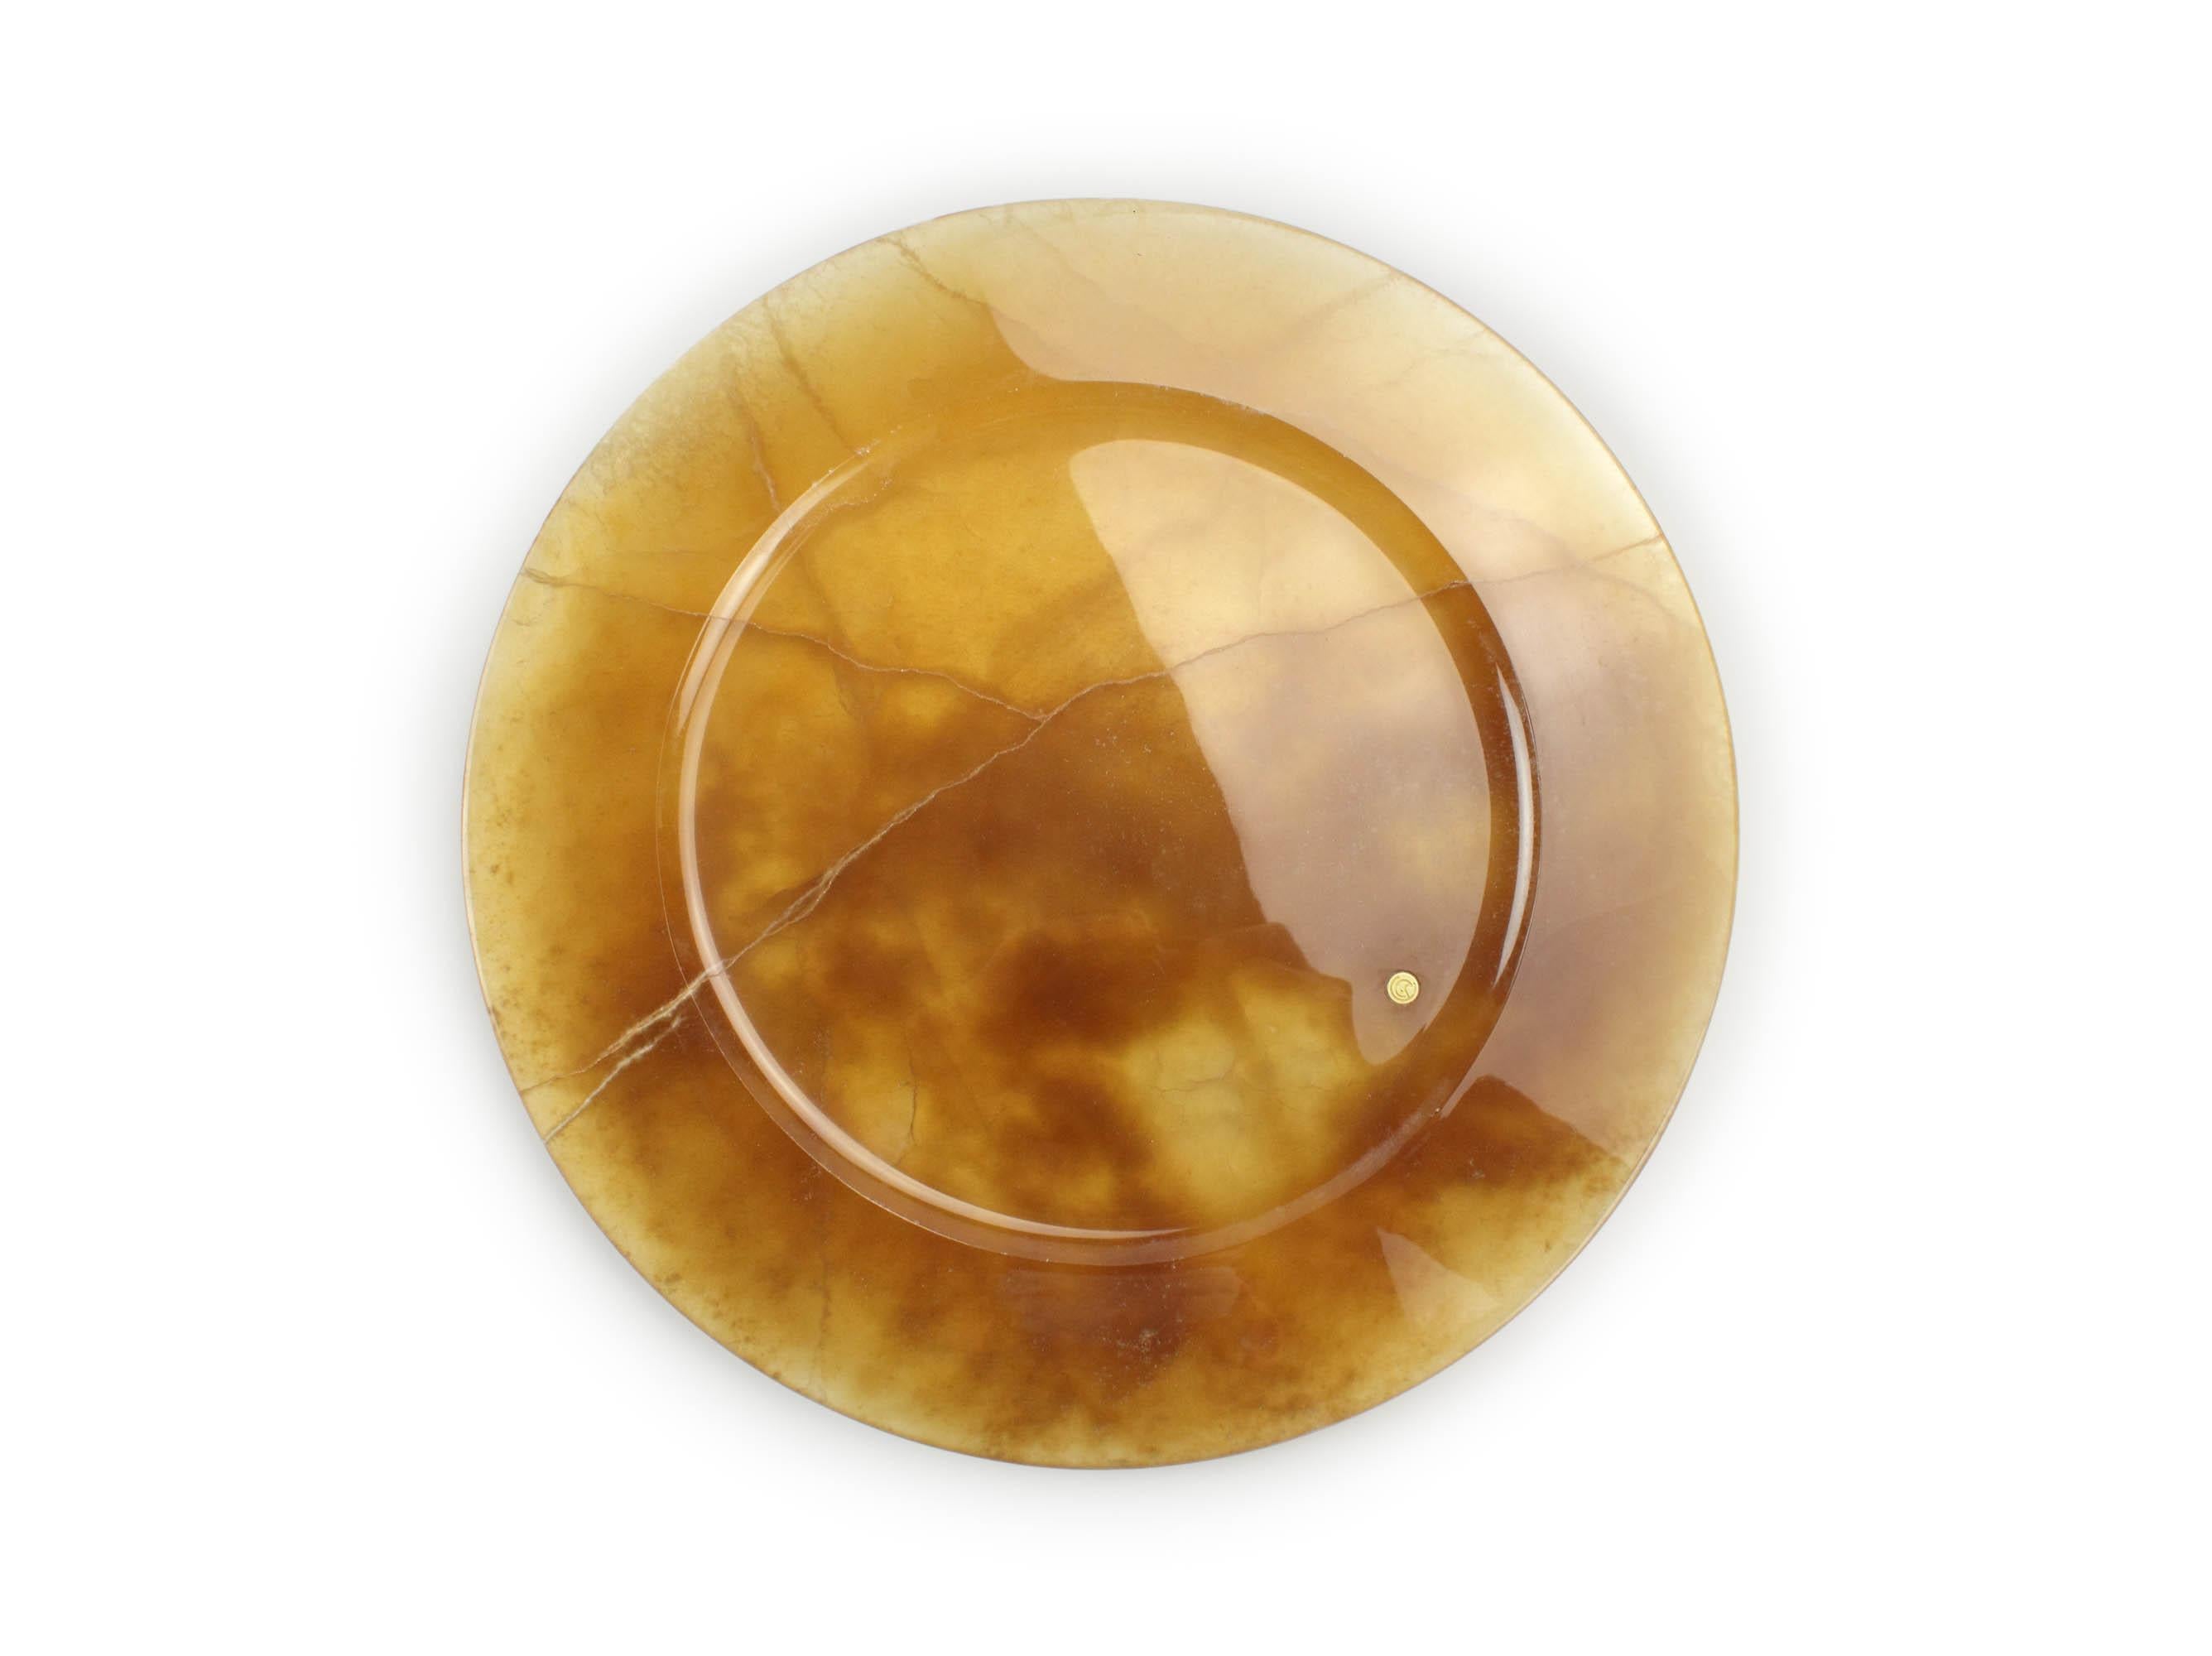 Hand carved charger plate from Amber onyx. Multiple use as charger plates, plates, platters and placers. The polished finishing underlines the transparency of the onyx making this a very precious object. 

Dimensions: D 33 x H 1.9 cm. Available in